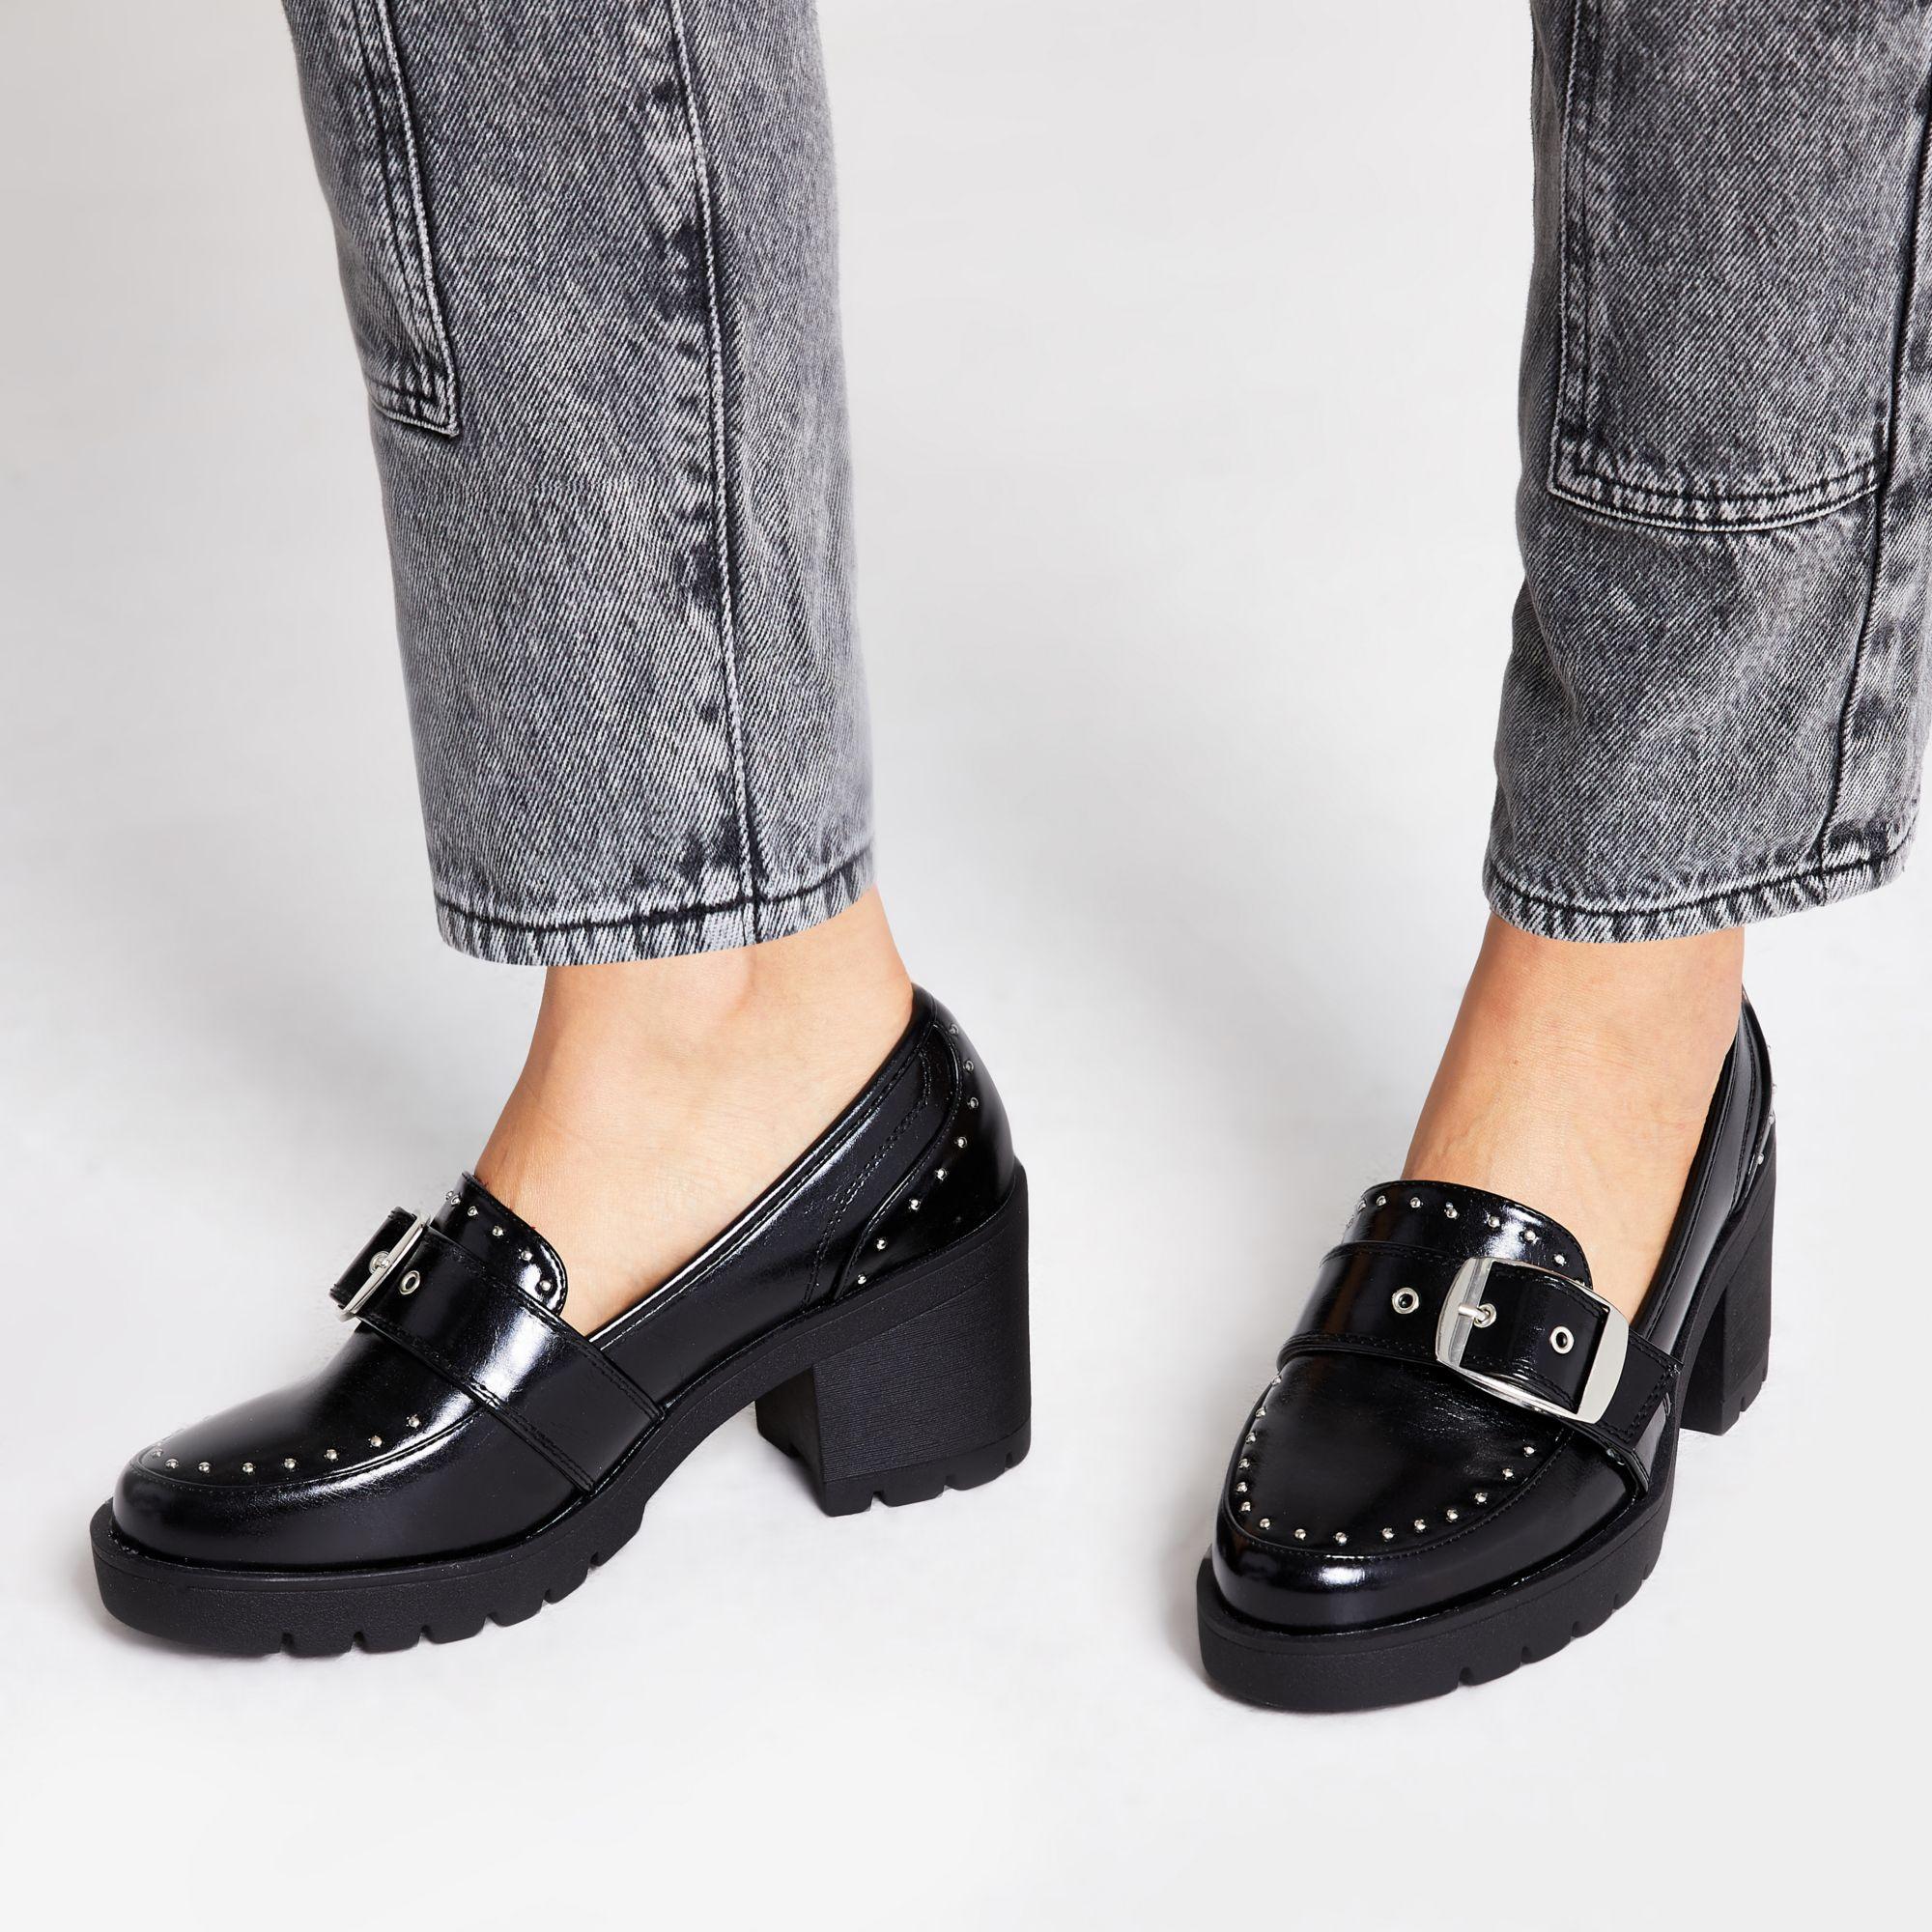 River Island Studded Chunky Heel Loafers in Black - Lyst